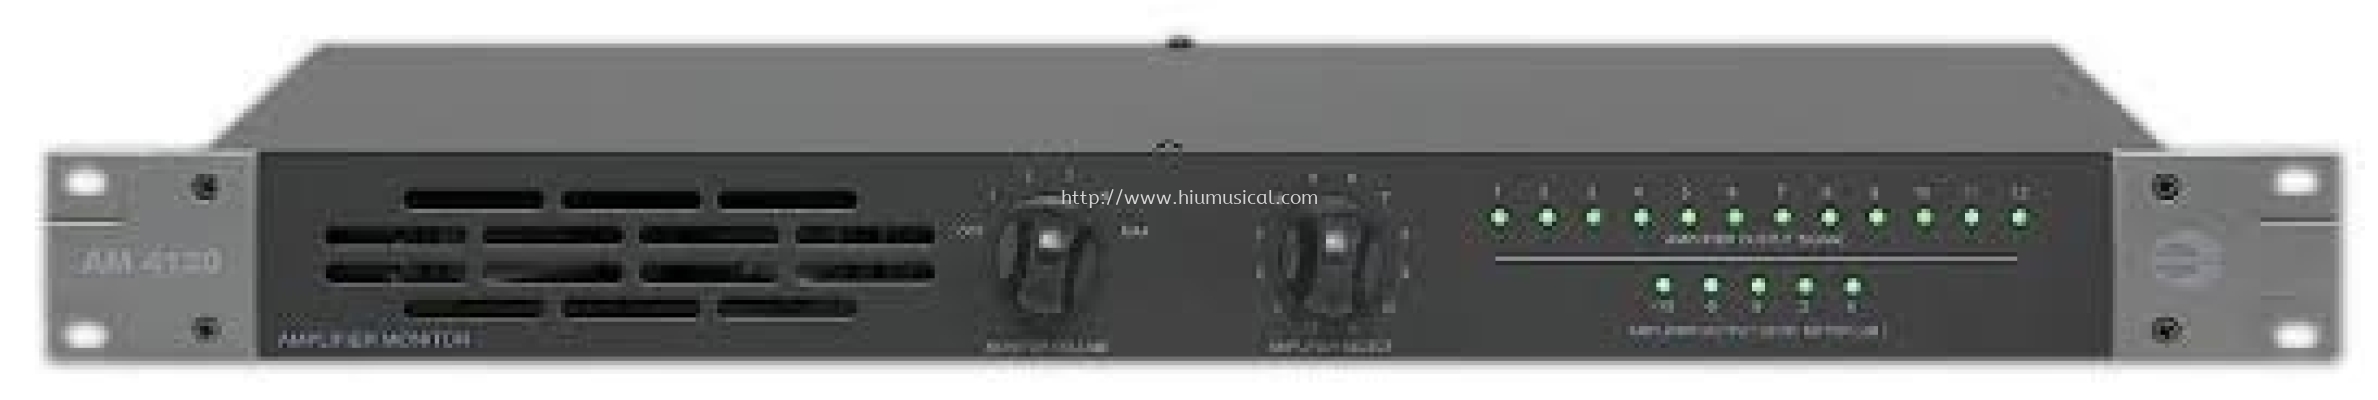 Amperes AM-4120 12 Channel Amplifier Monitor Panel